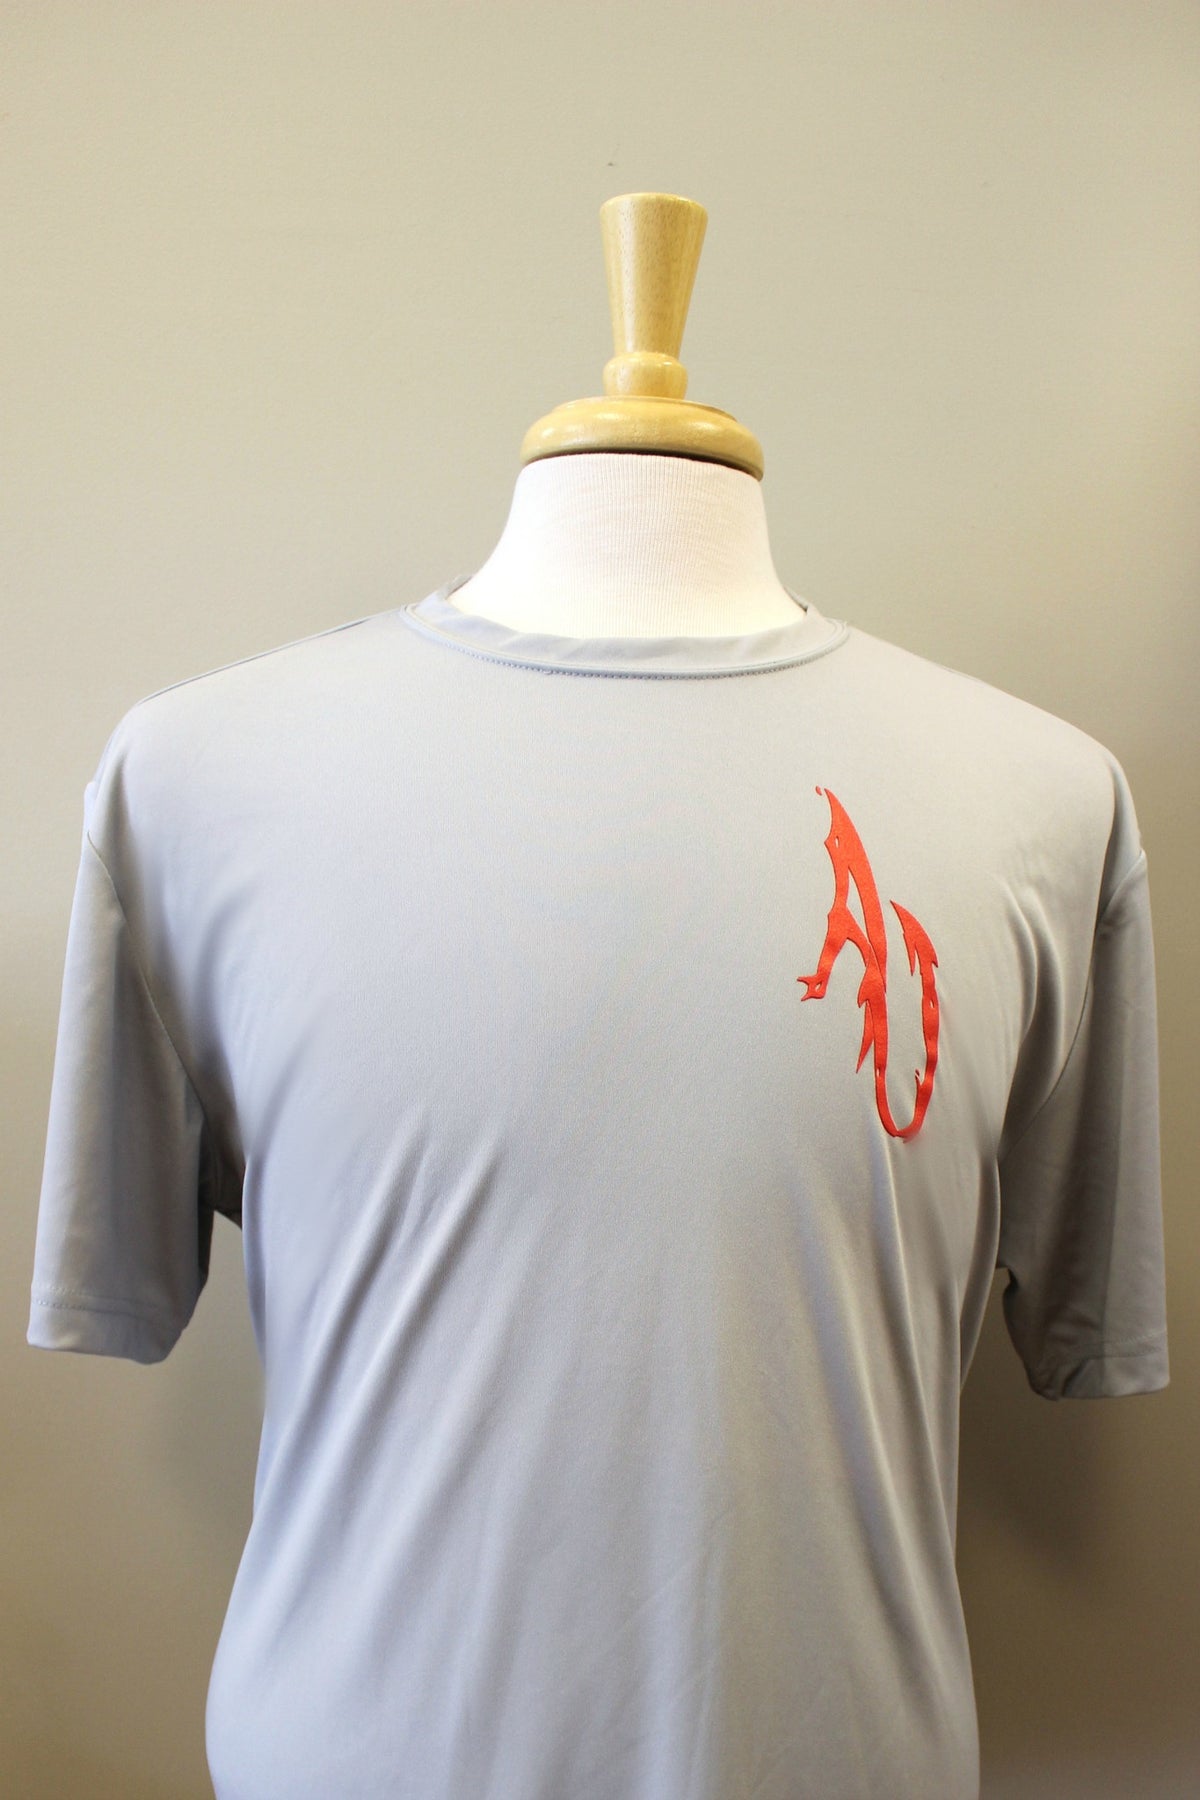 Angler Up: Short Sleeve Performance Tee, Gray/Red